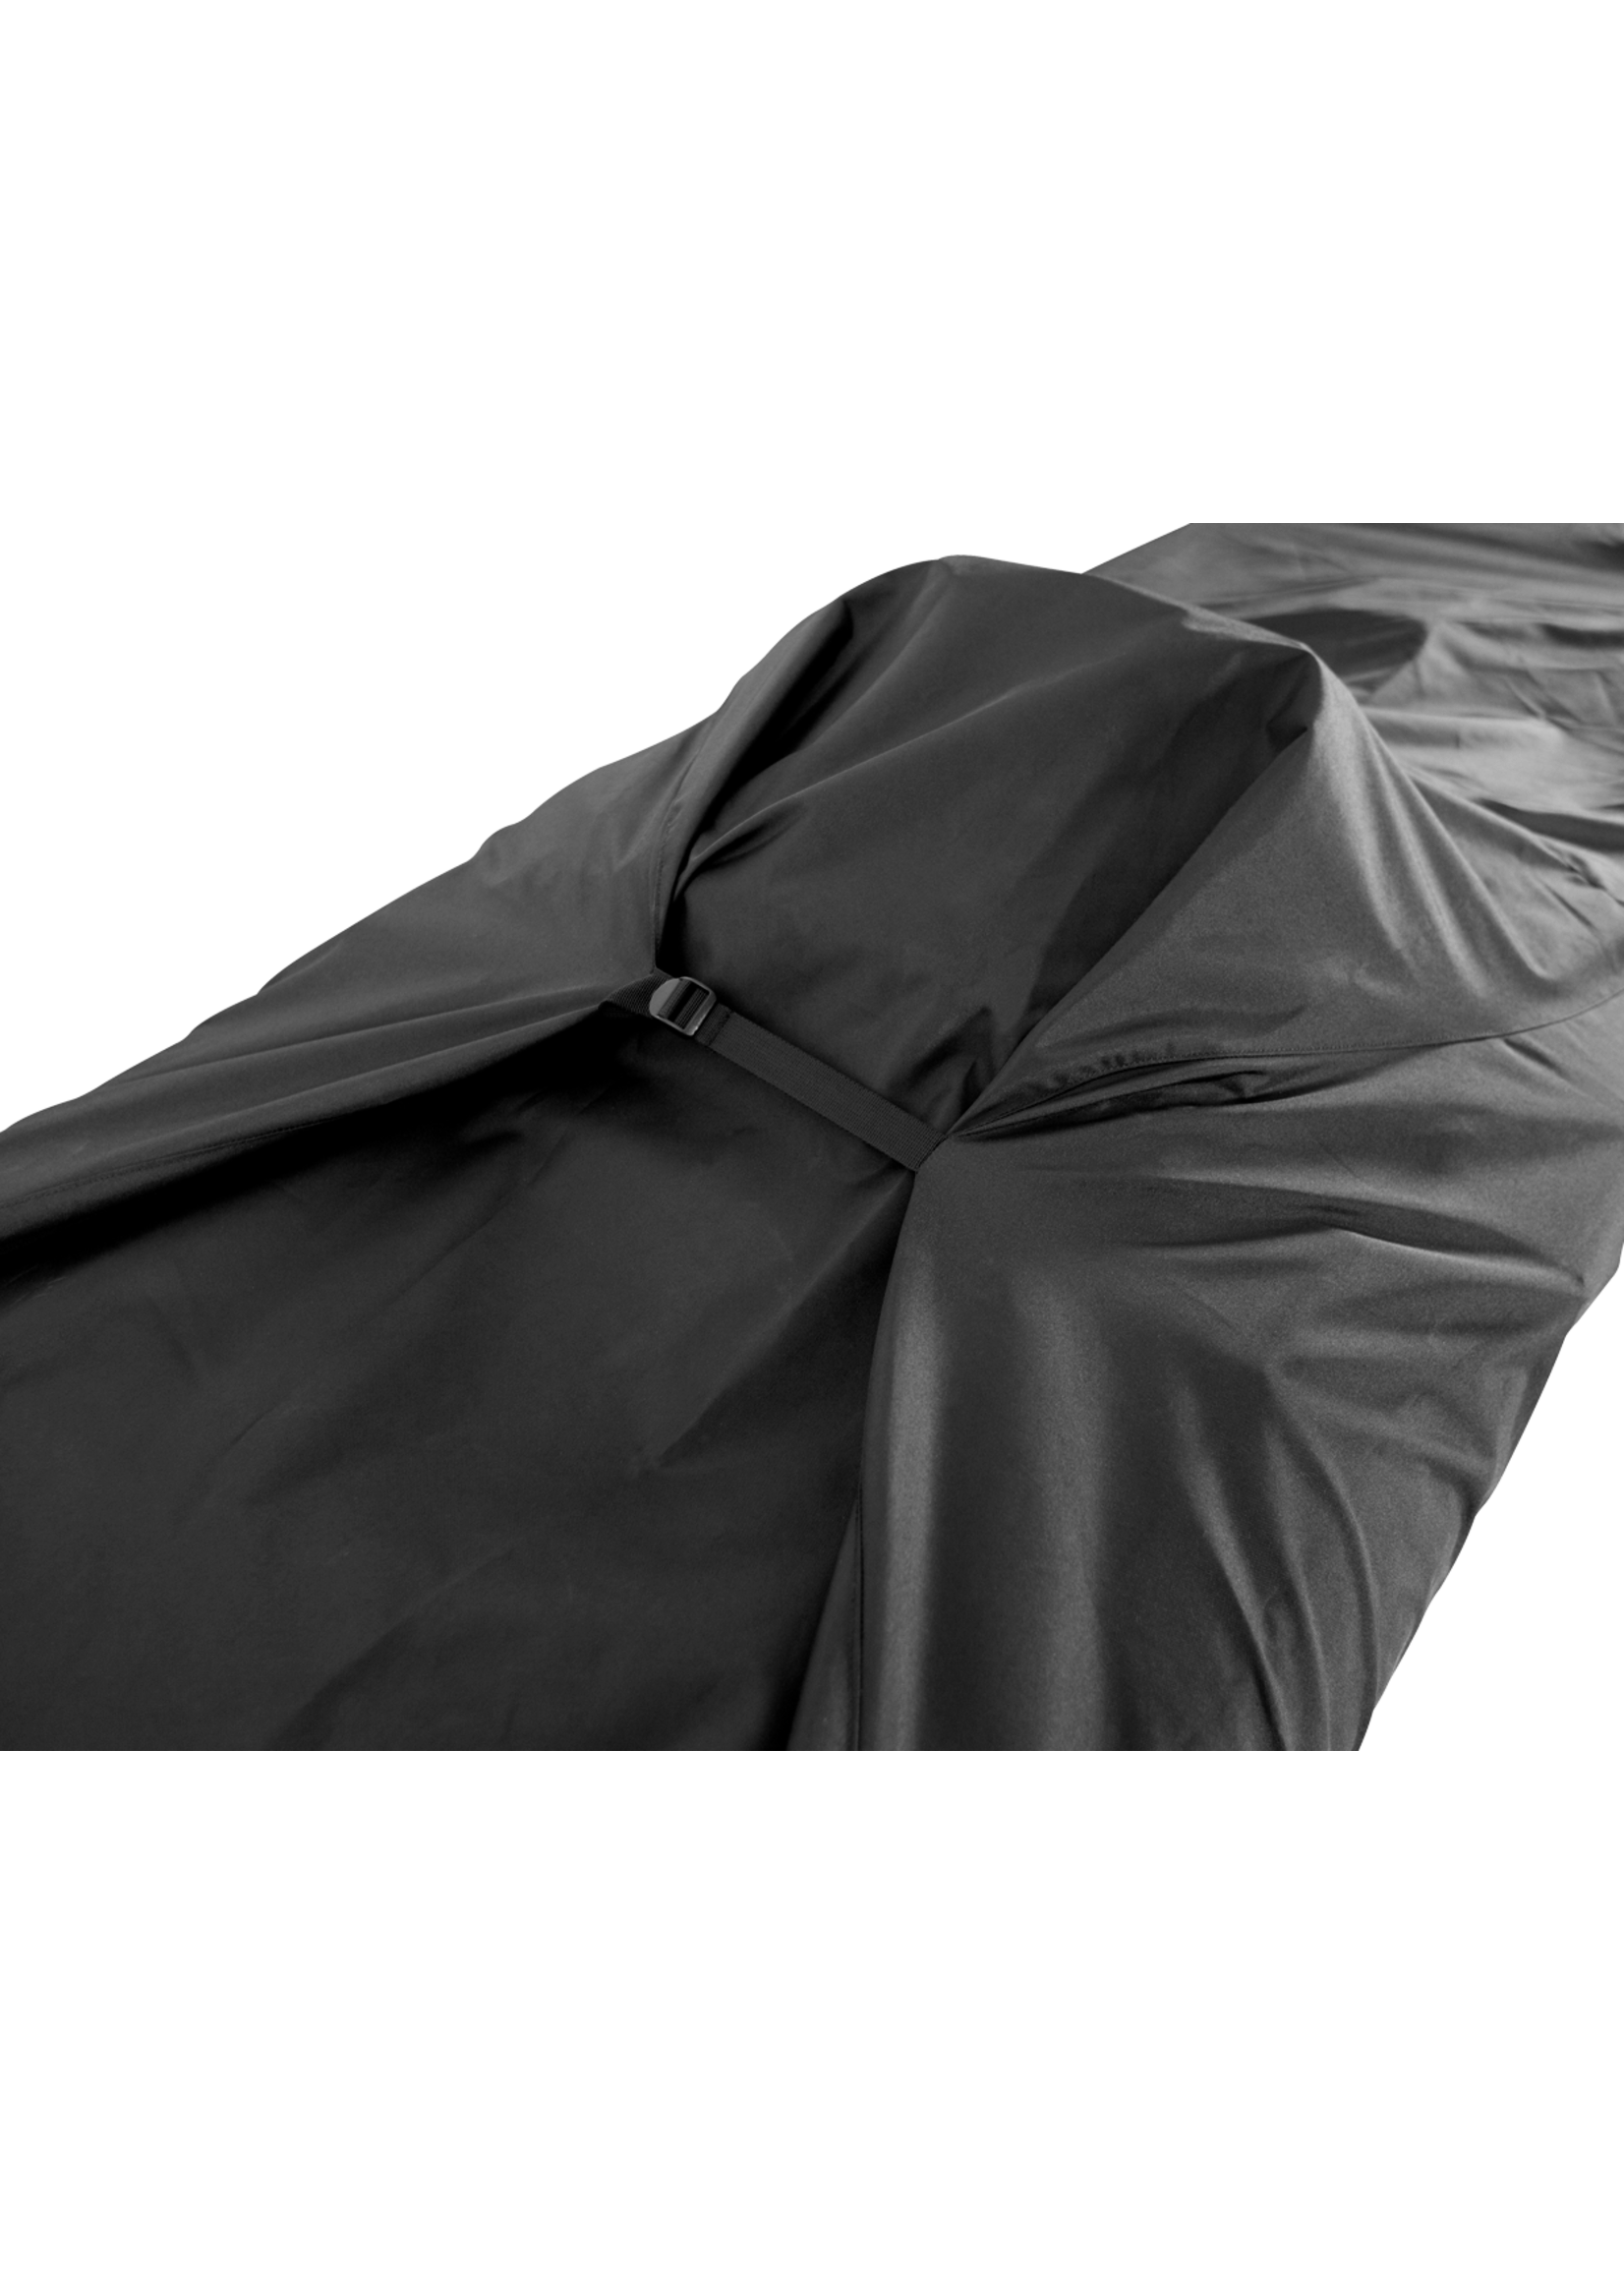 Wilderness Systems Housse pour kayak Heavy Duty Cover for Sit-on-Top de Wilderness Systems